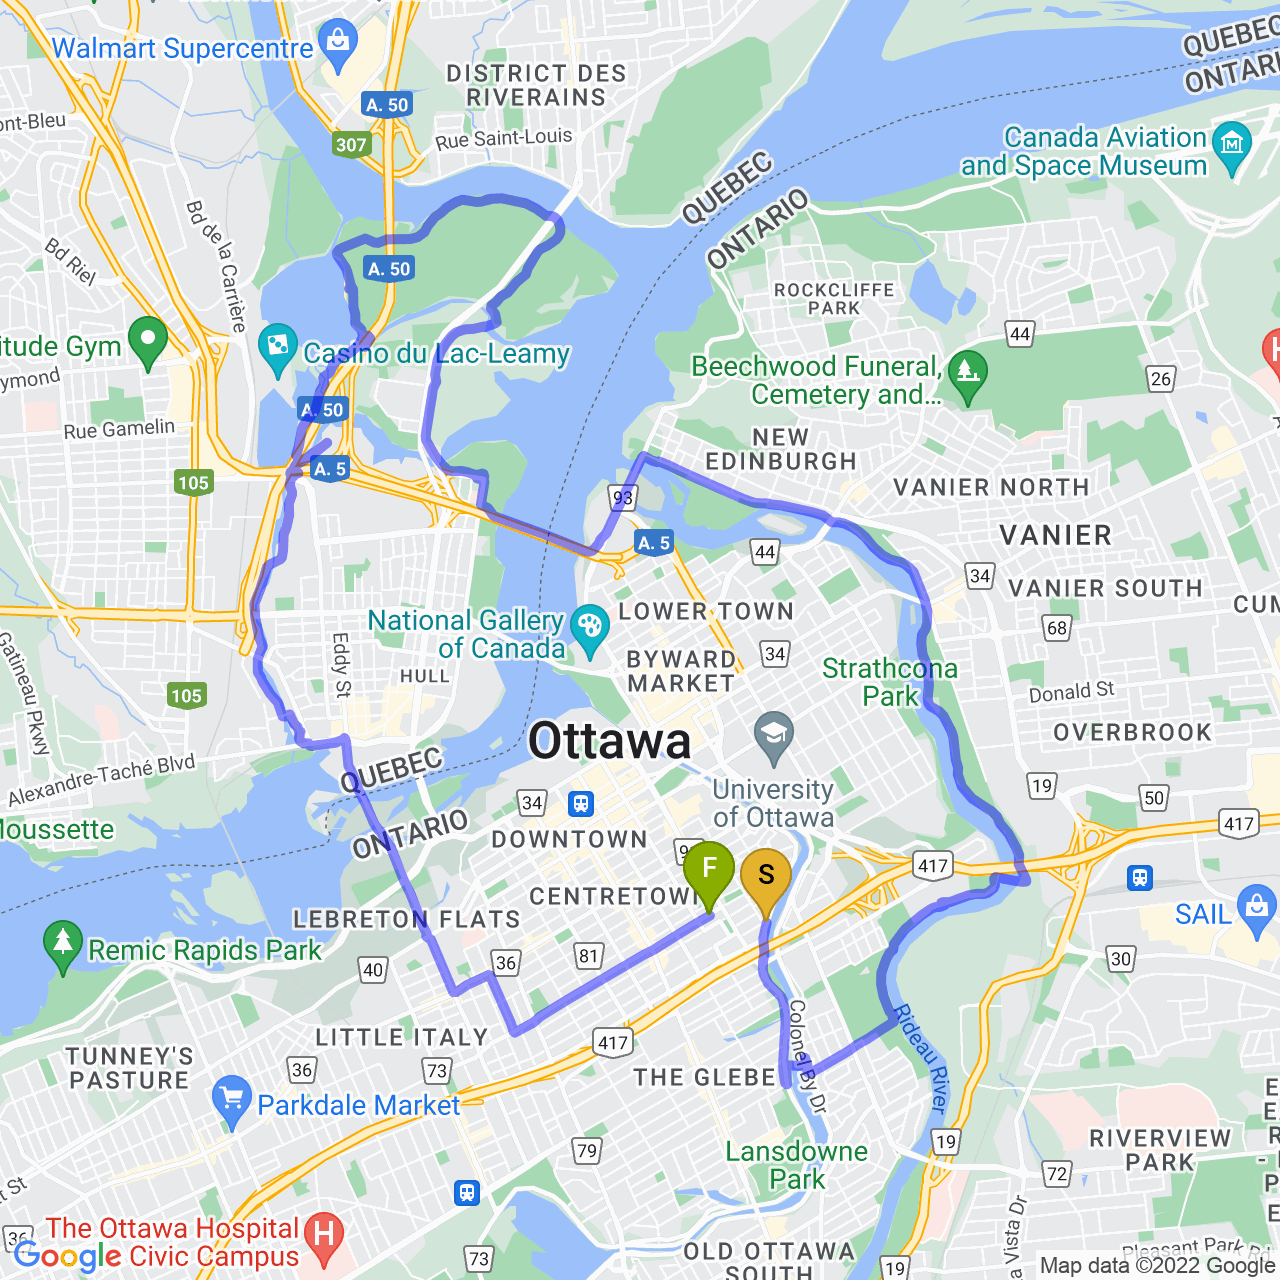 map of the “idgaf ride”